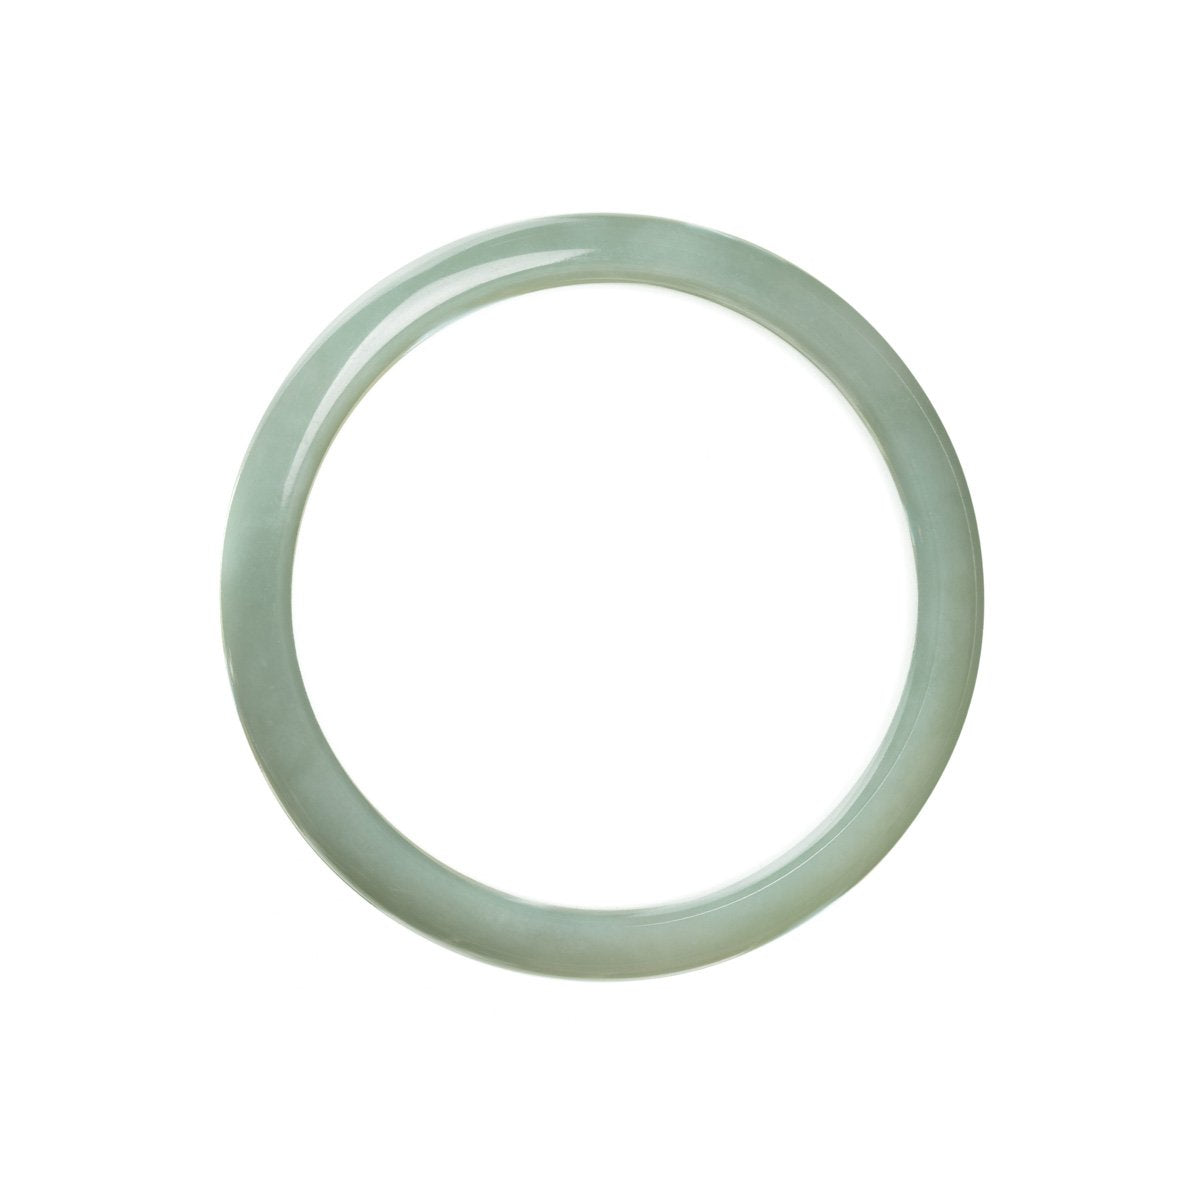 A beautiful half moon-shaped bracelet made of authentic natural light green jadeite jade, measuring 56mm.